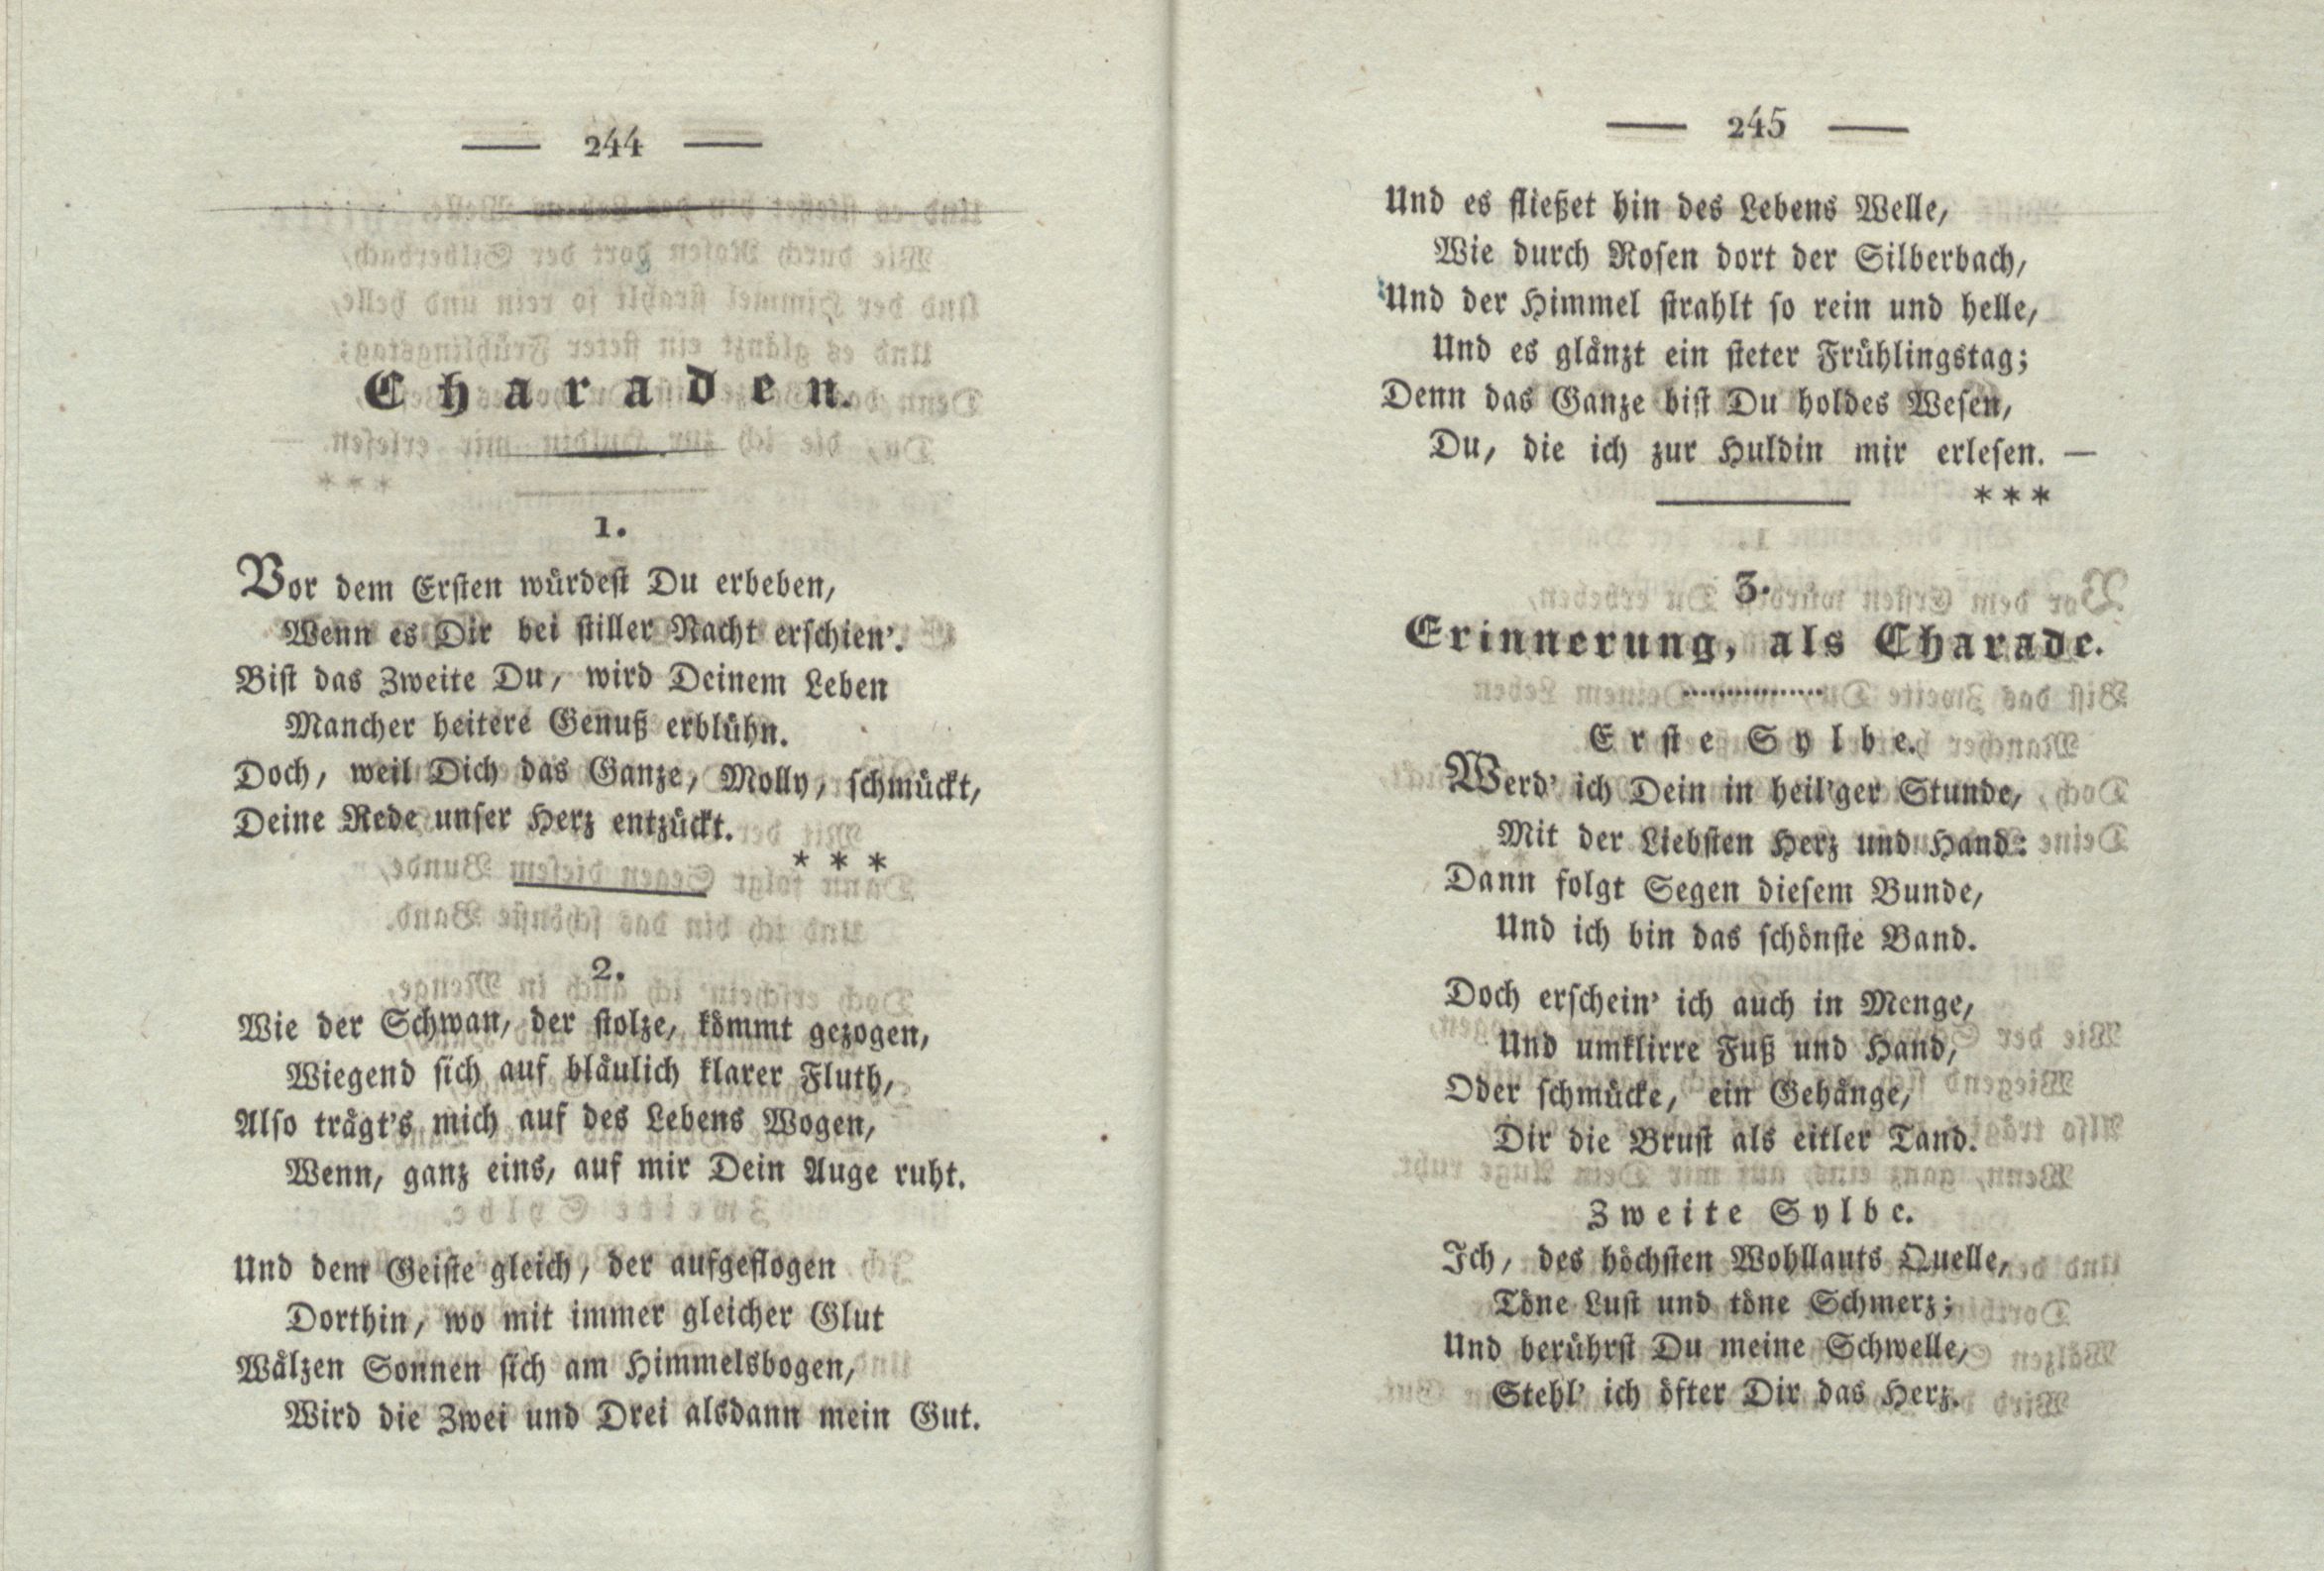 Erinnerung, als Charade (1825) | 1. (244-245) Main body of text